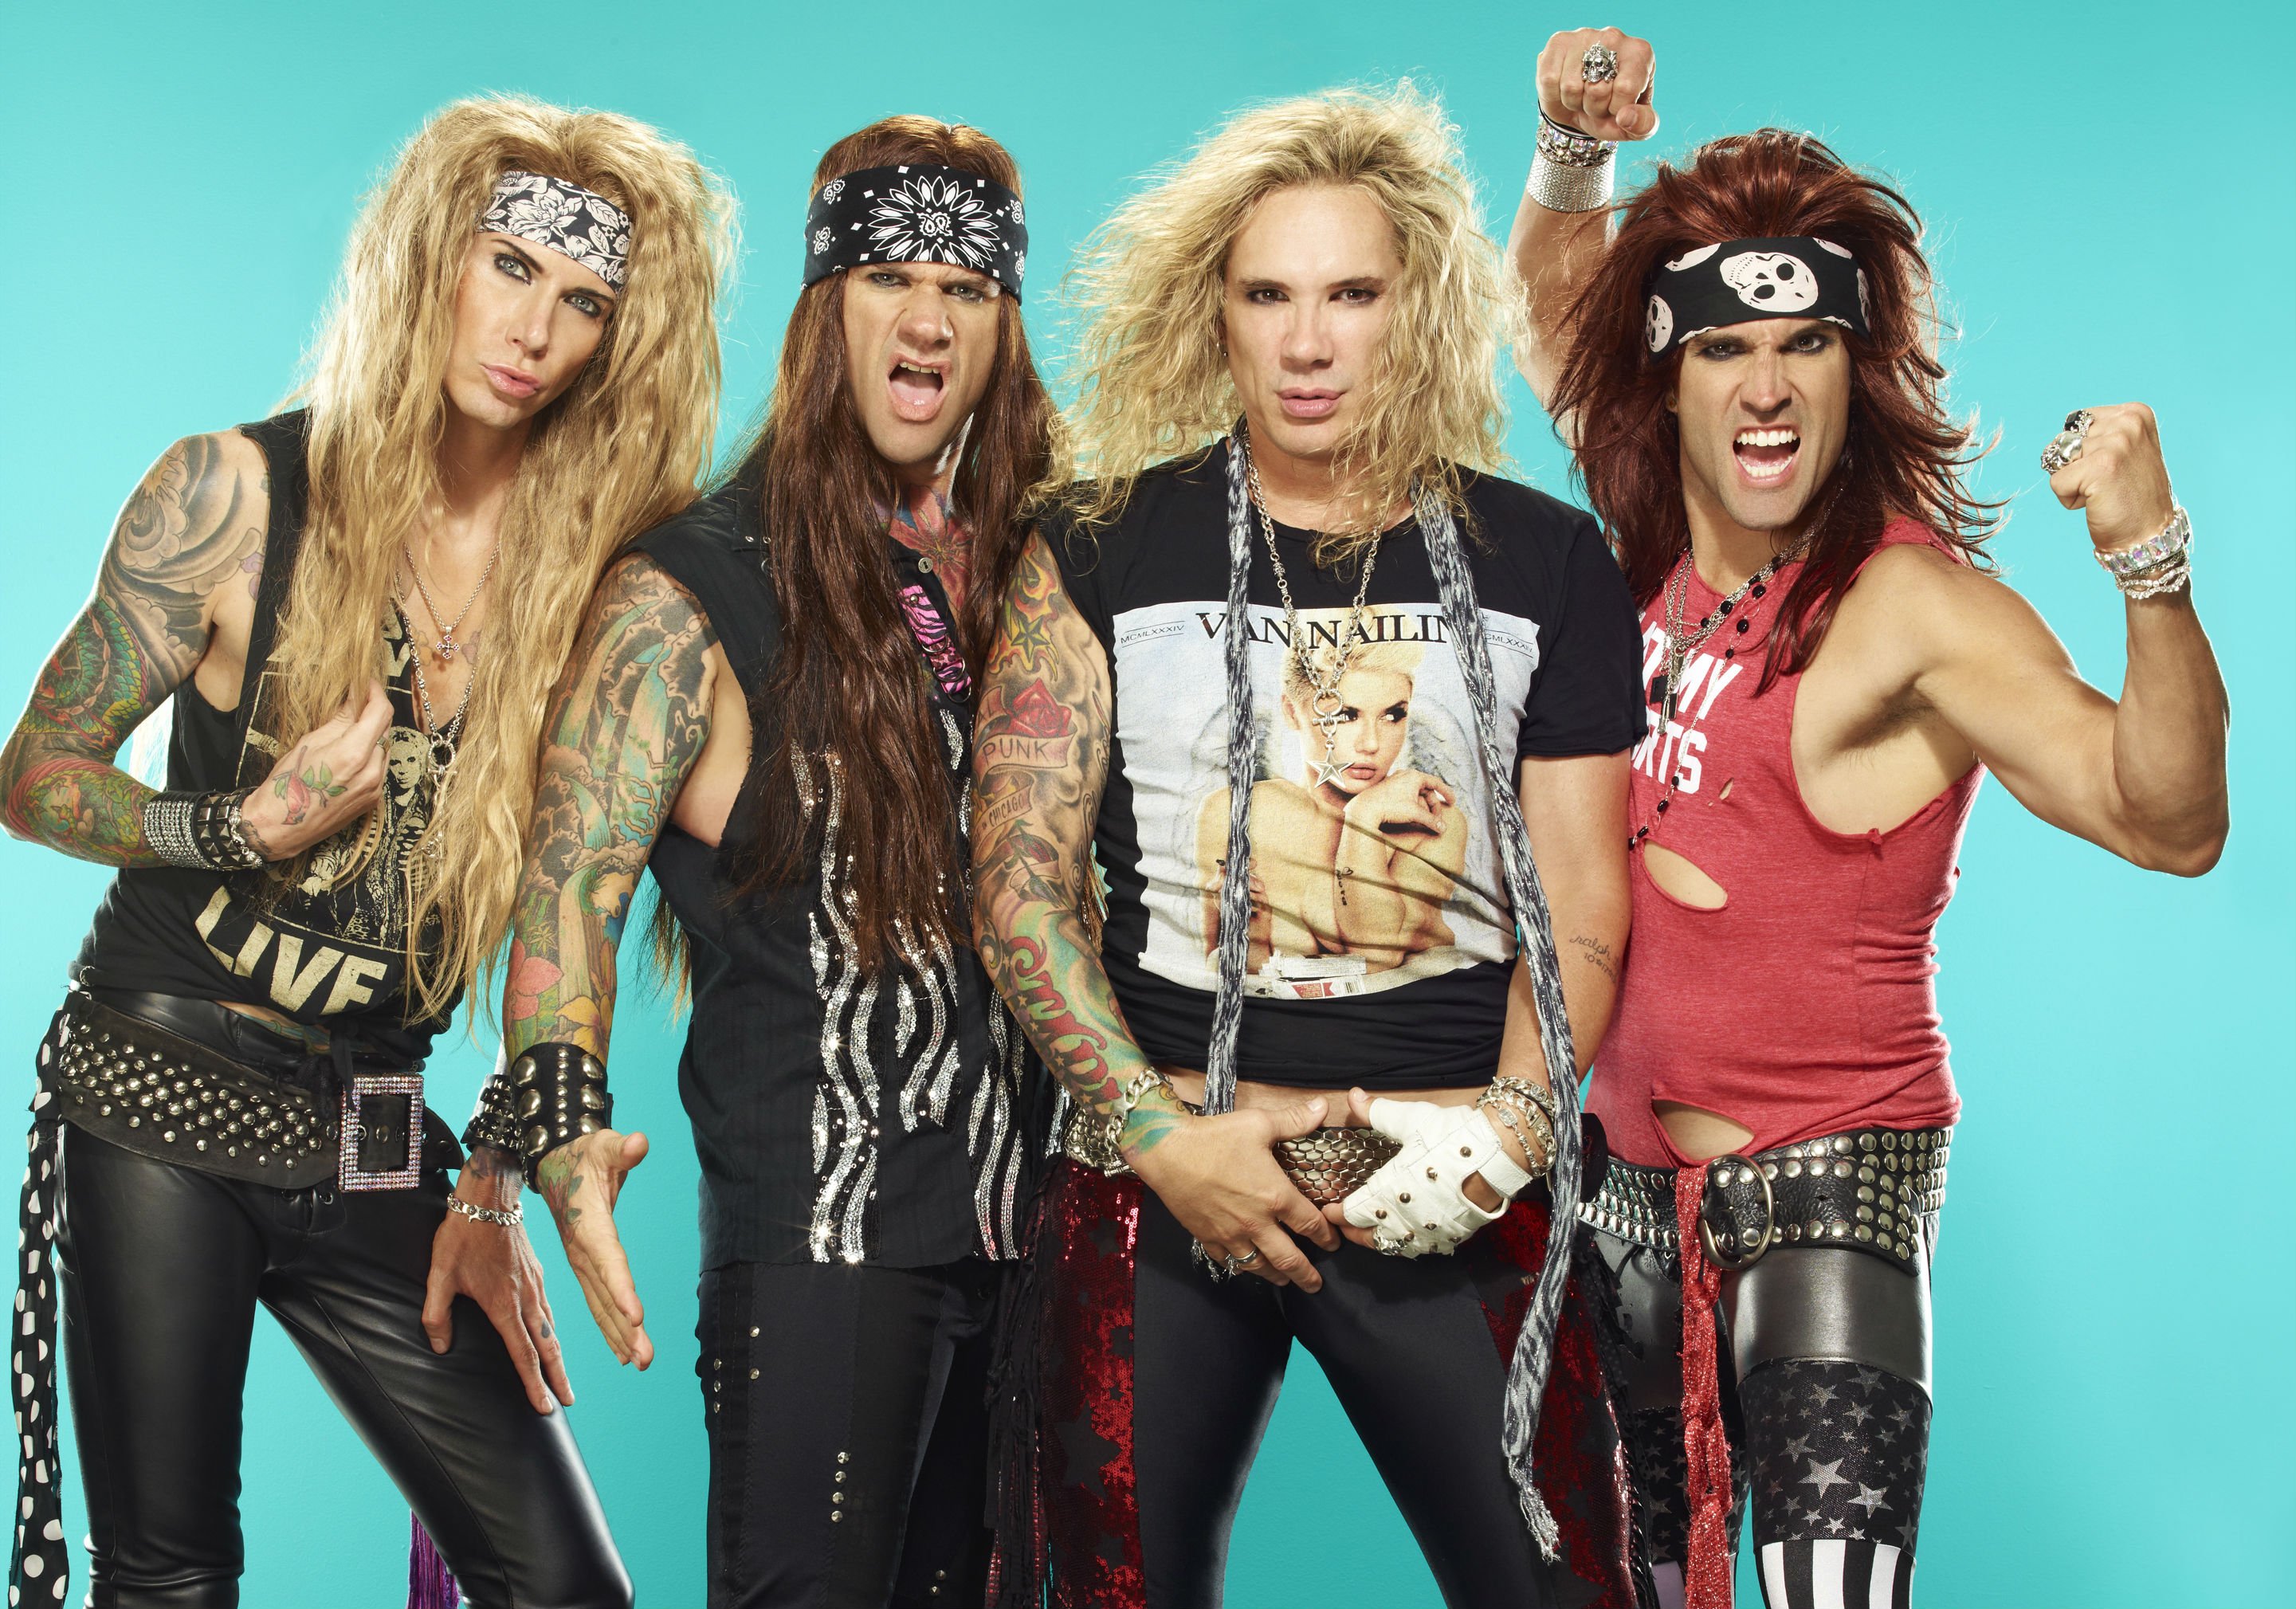 Wallpaper Steel Panther, Glam Metal, All You Can Eat, Heavy Metal, British Invasion, Background Free Image